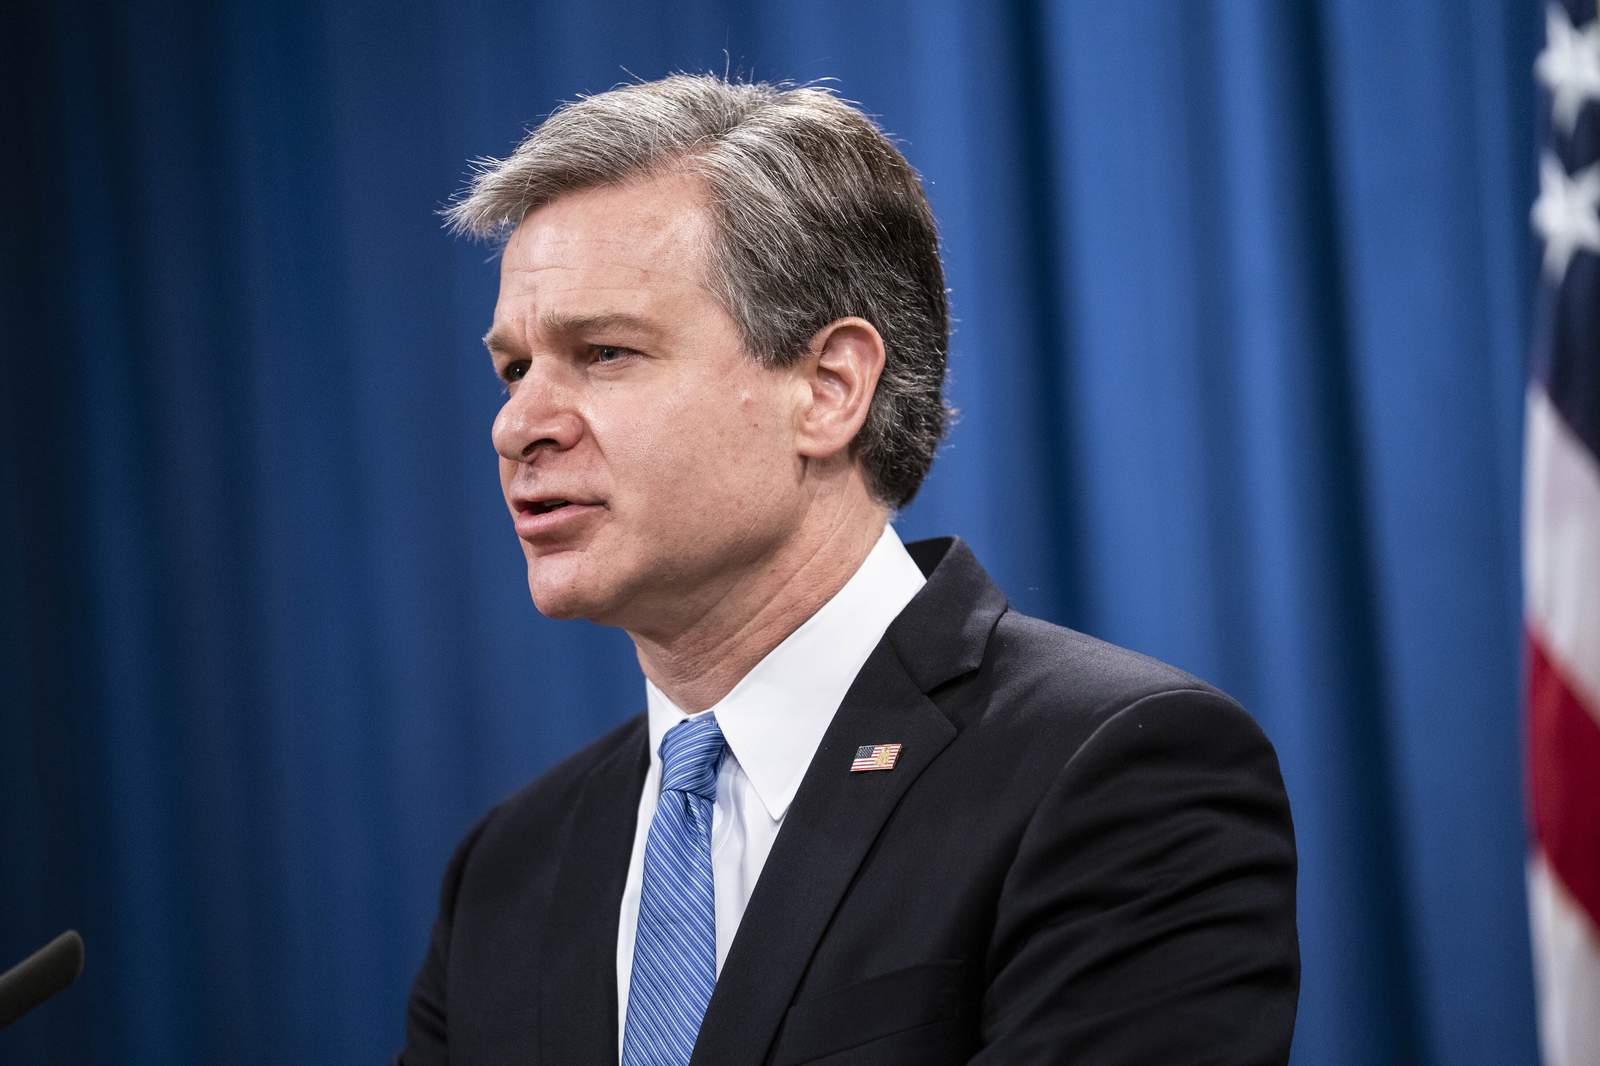 LIVE STREAM: FBI chief Wray testifies before Senate on extremism, Capitol riot